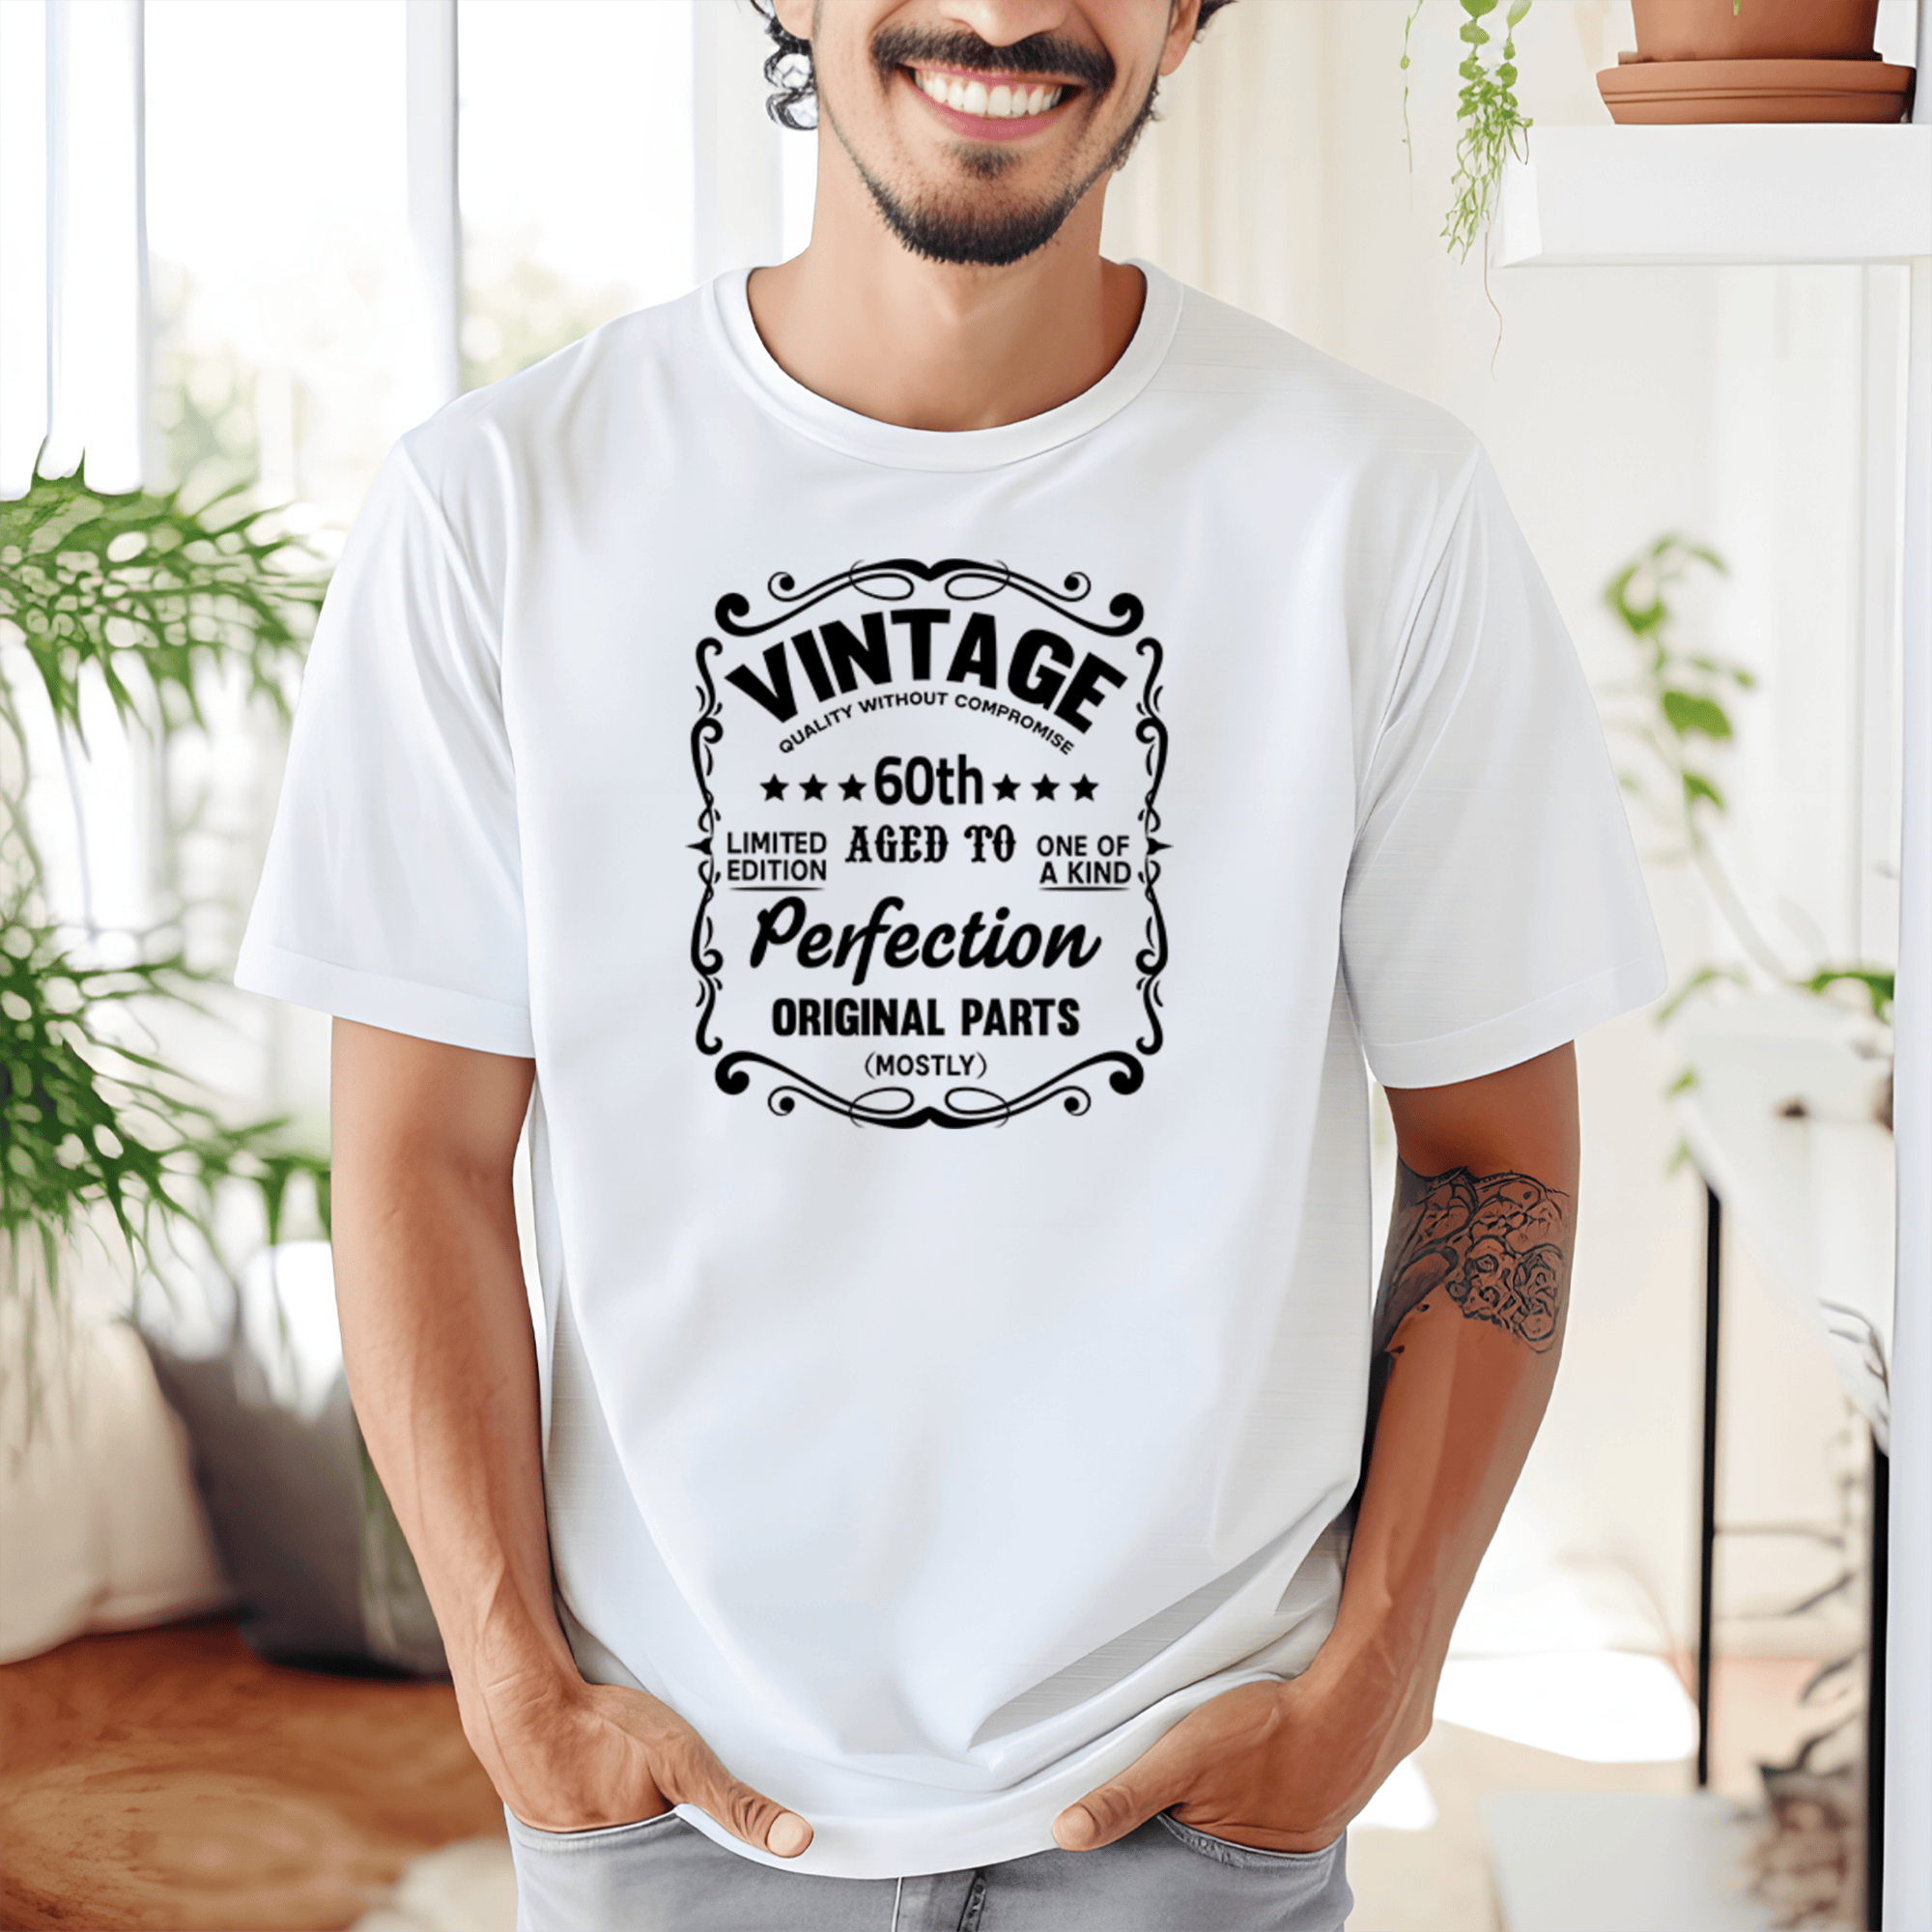 Mens White T Shirt with 60th-Vintage design